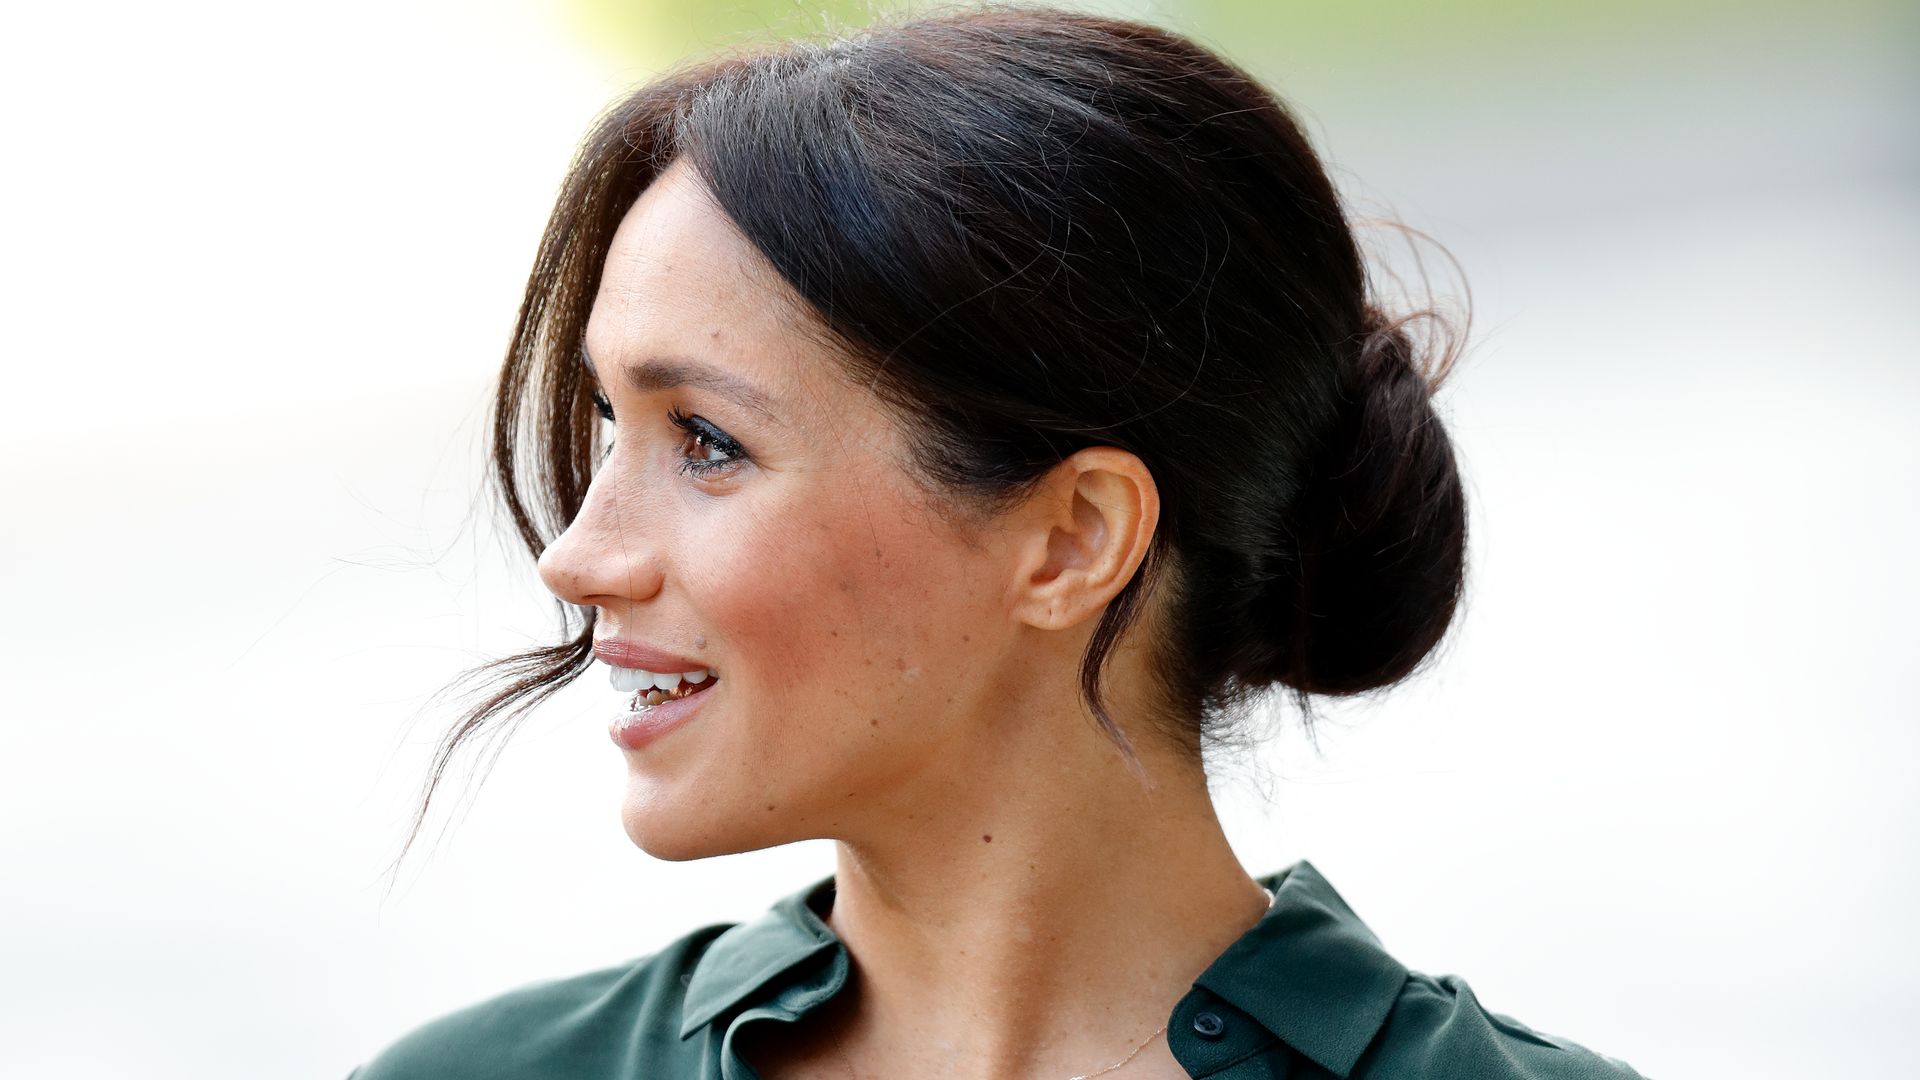 Duchess Meghan’s hair switch-up has sparked serious envy in us all